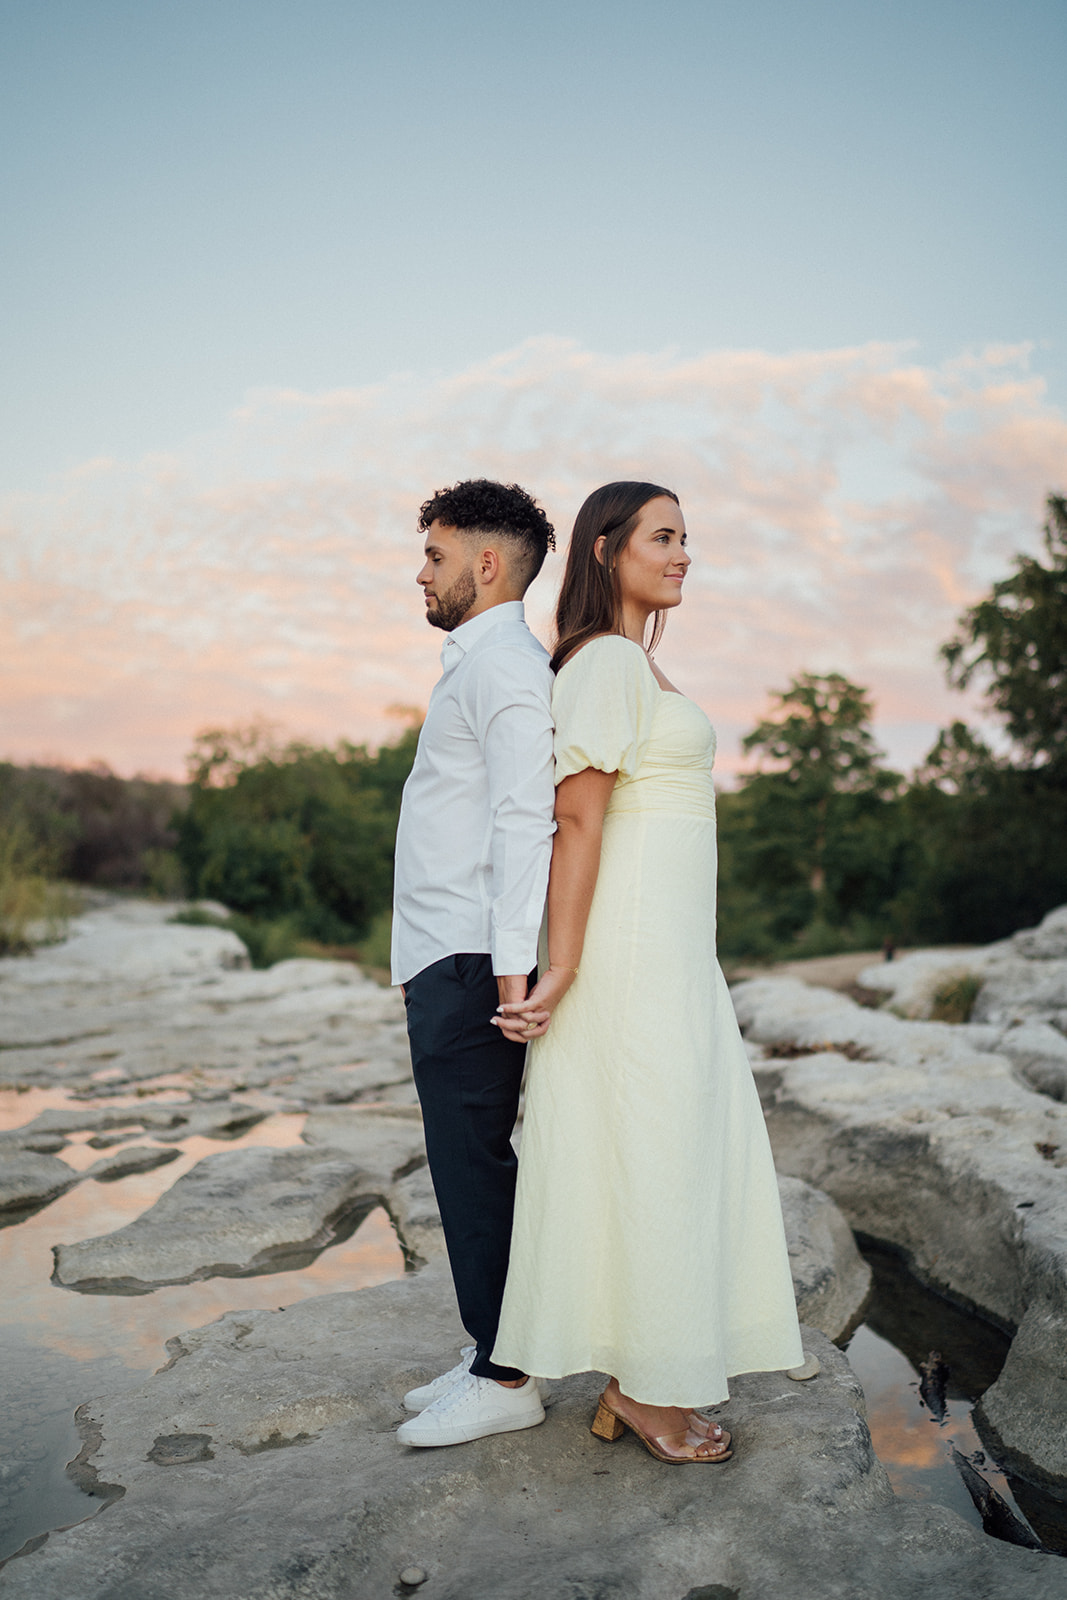 Taryn and Gavin embracing during their engagement photos at McKinney Falls